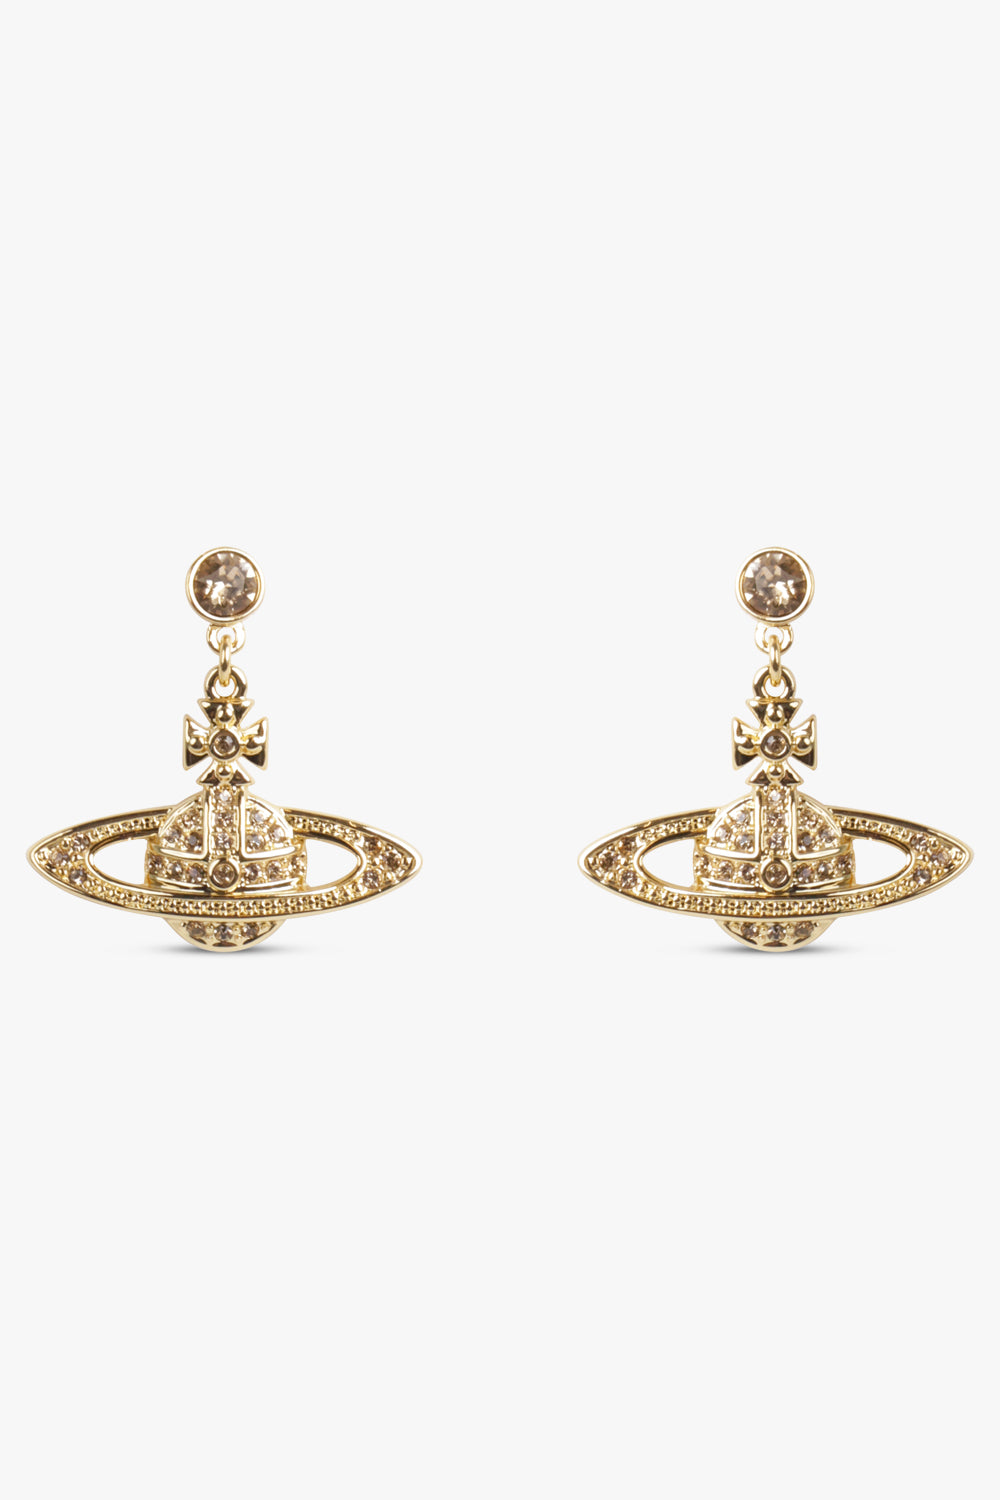 VIVIENNE WESTWOOD JEWELLRY GOLD / GOLD MINI BAS RELIEF DROP EARRINGS | GOLD